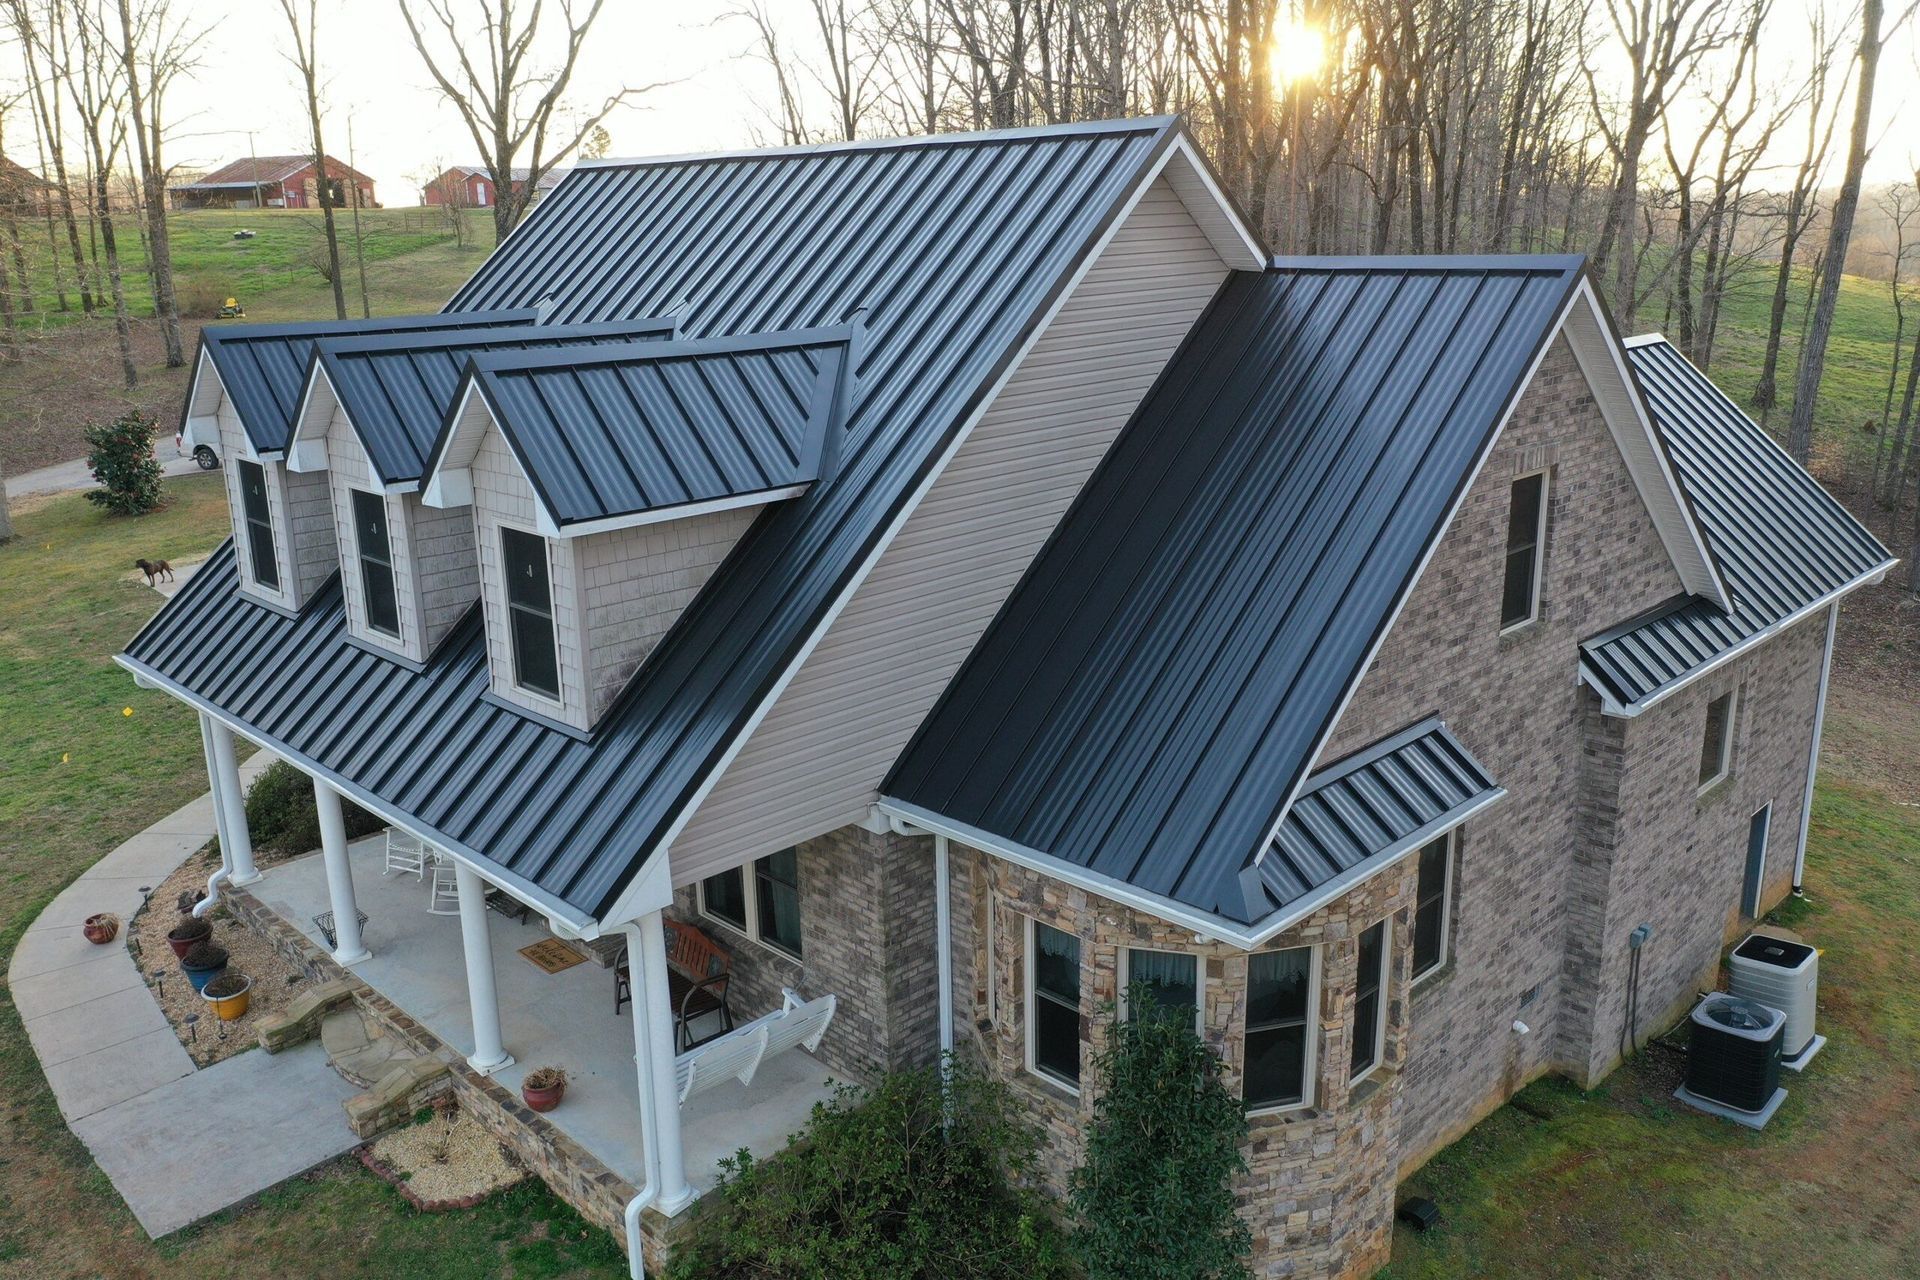 An aerial view of a large brick house with a black metal roof.